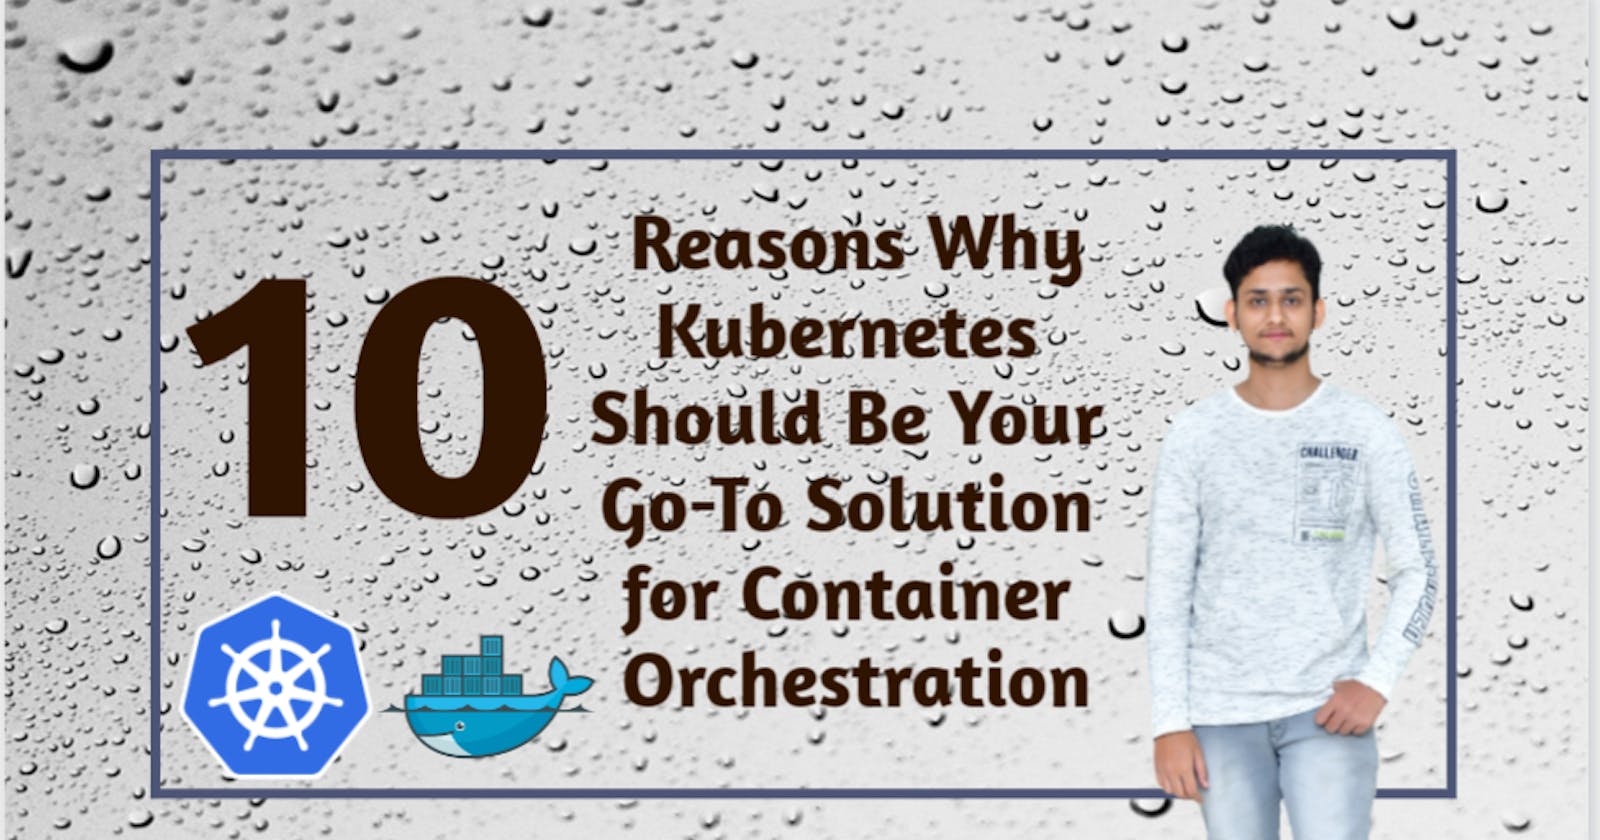 10 Reasons Why Kubernetes Should Be Your Go-To Solution for Container Orchestration